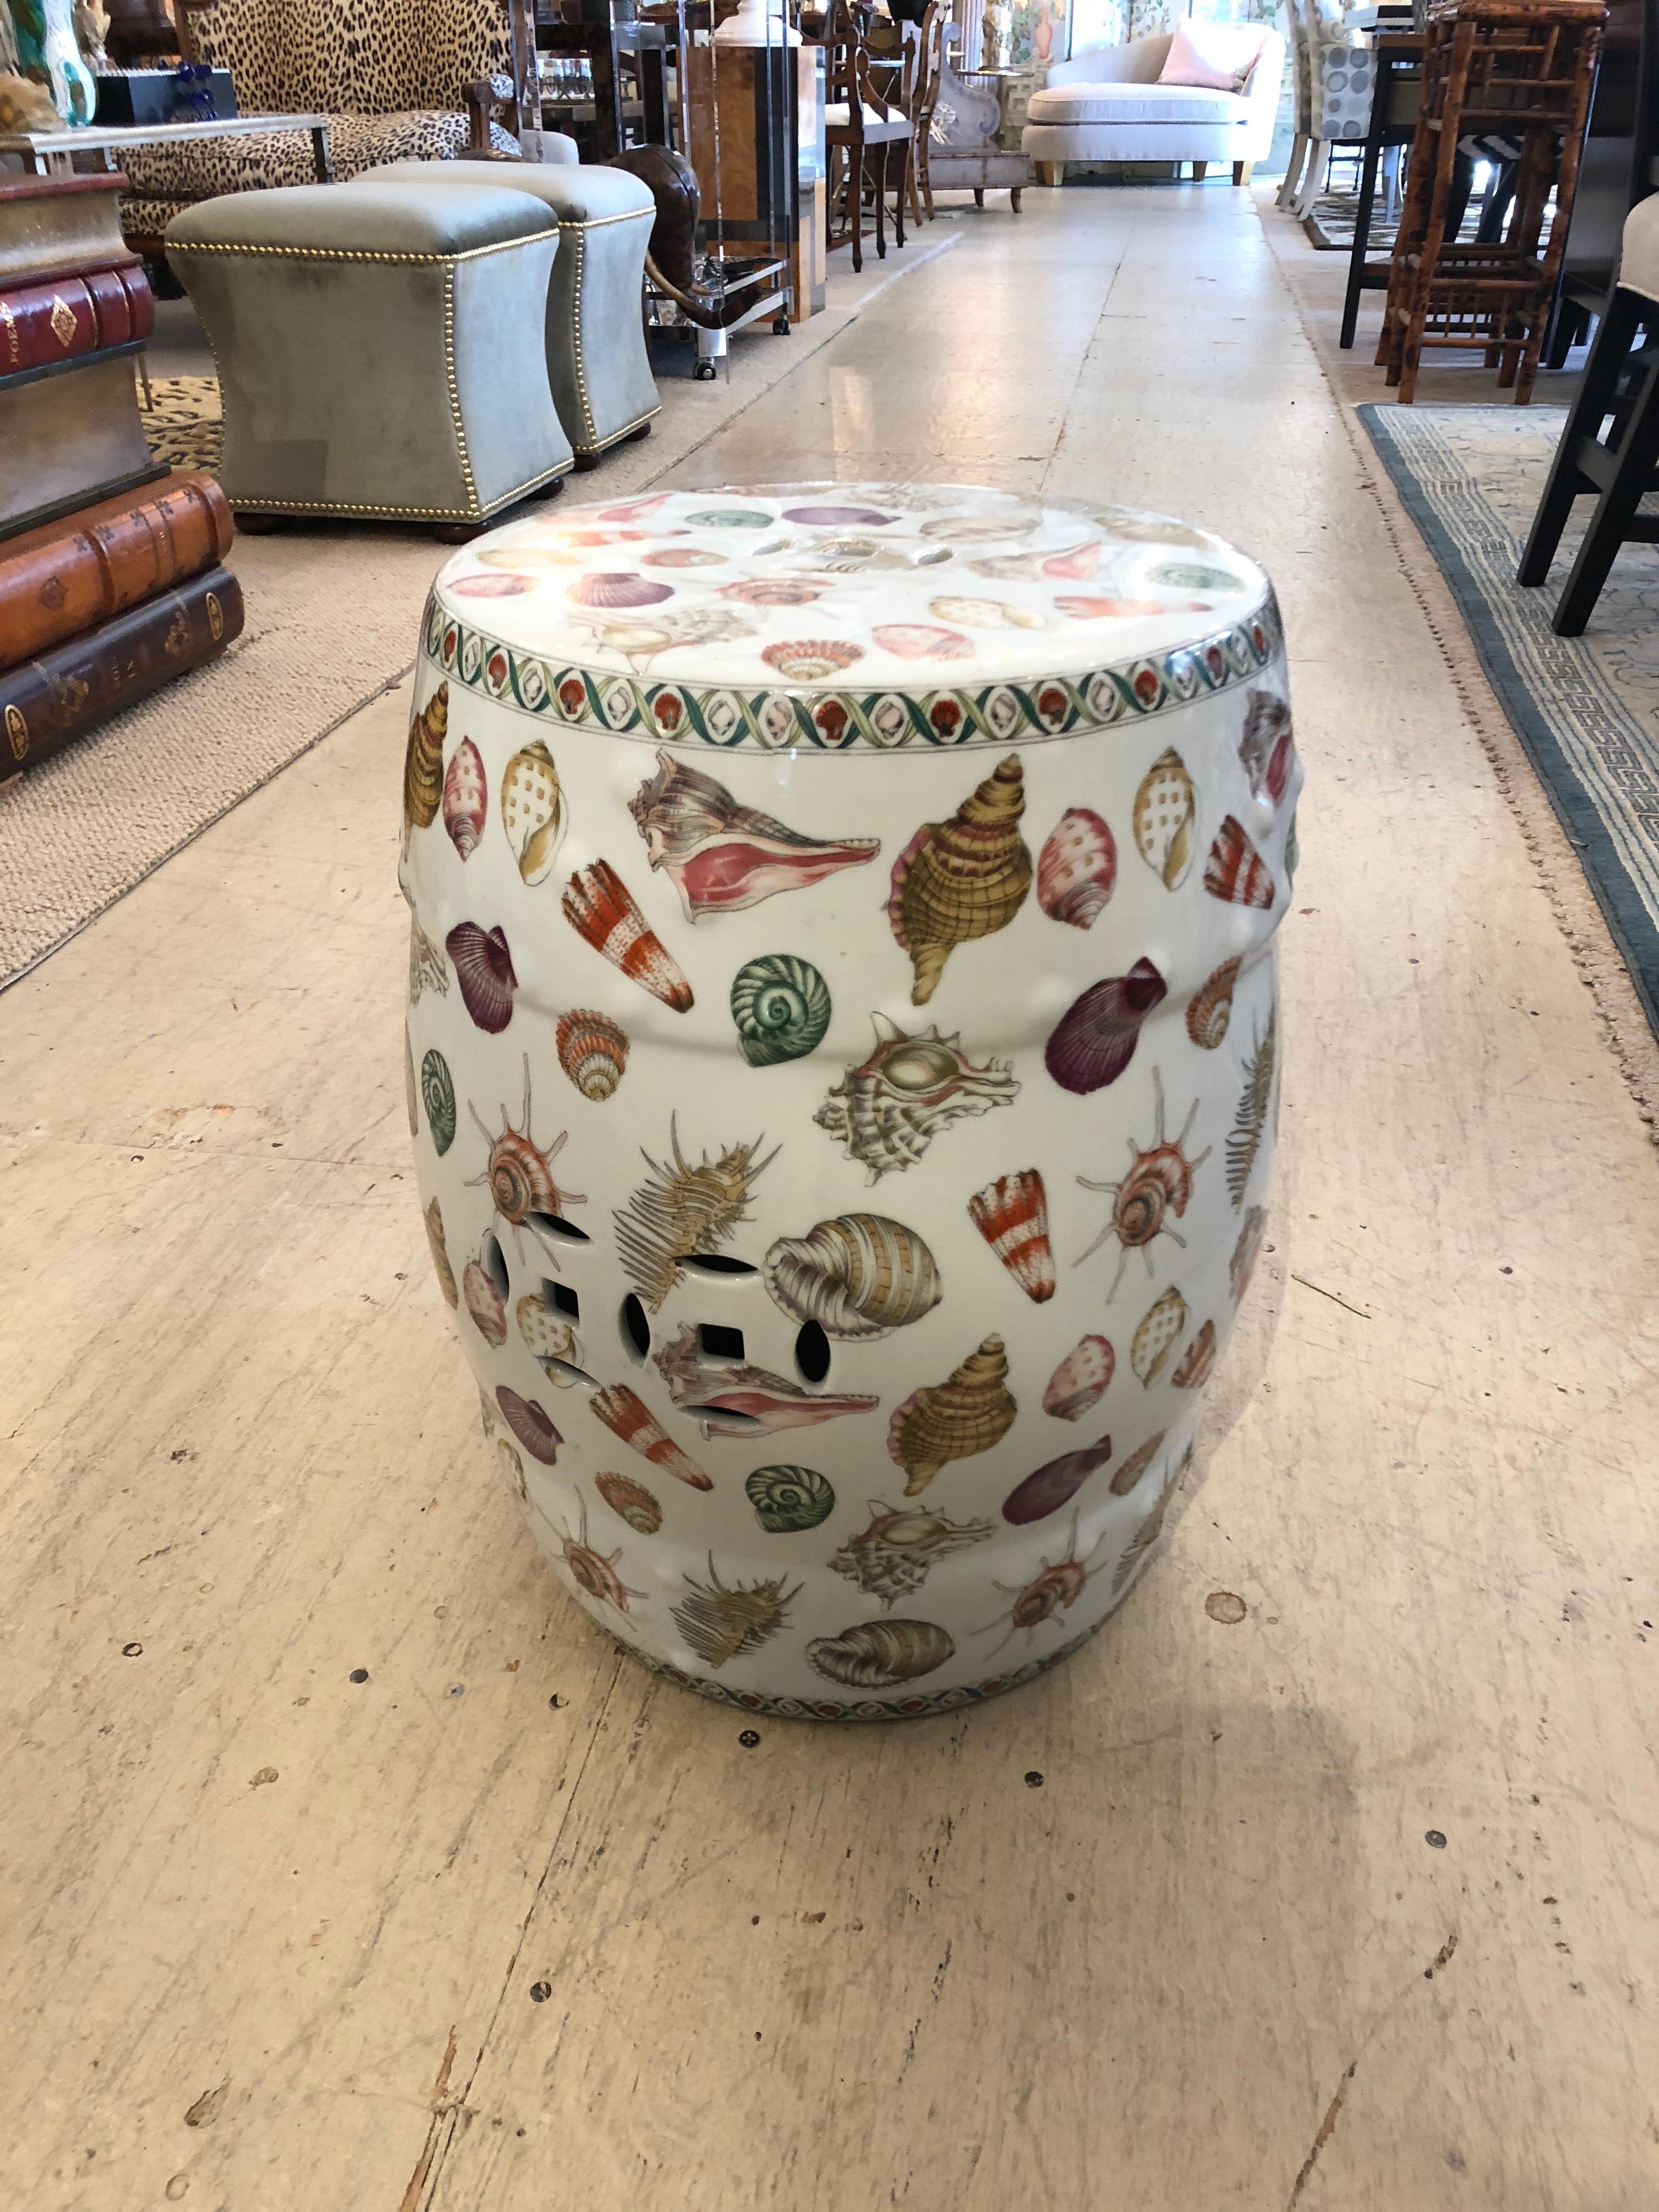 Delightfully decorated white porcelain garden seat end table adorned with renderings of seashells.